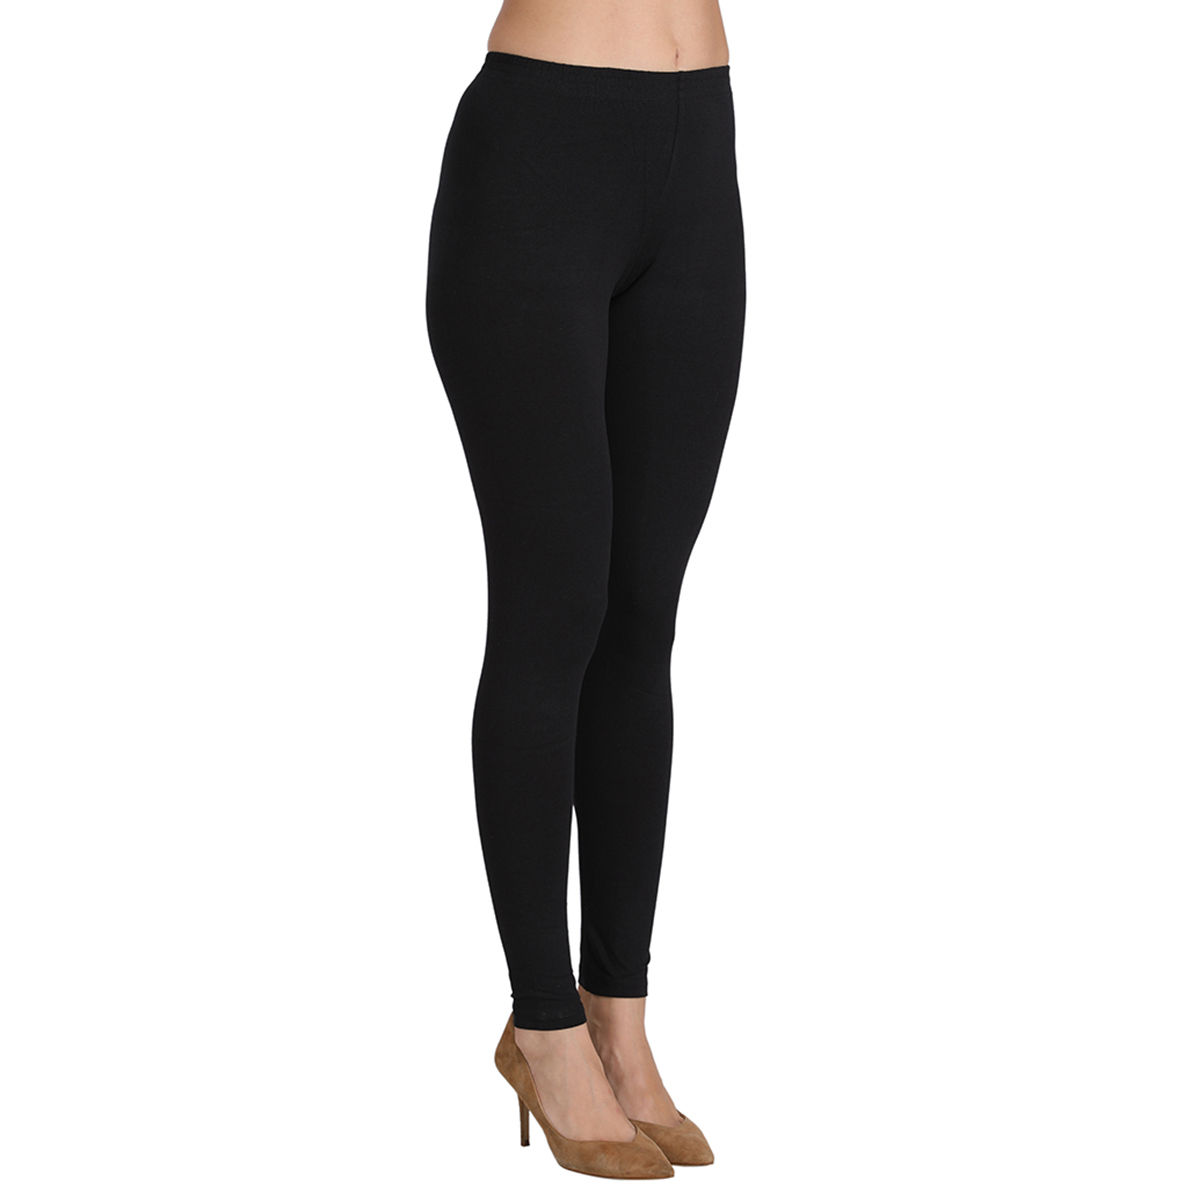 Buy Women's Ankle Length Leggings - Regular Wear - Size : Free Size, Color:  Black at Amazon.in